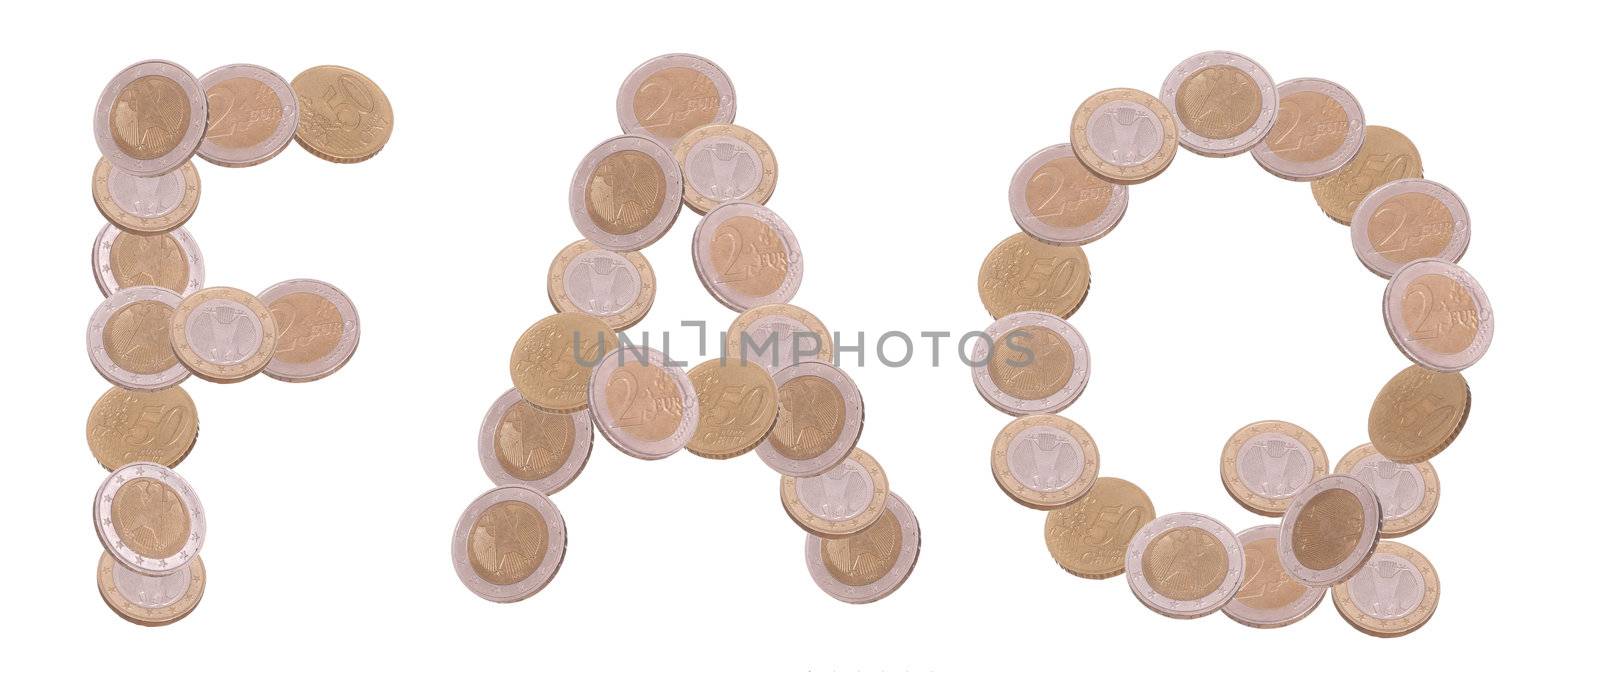 FAQ - written with coins on white background